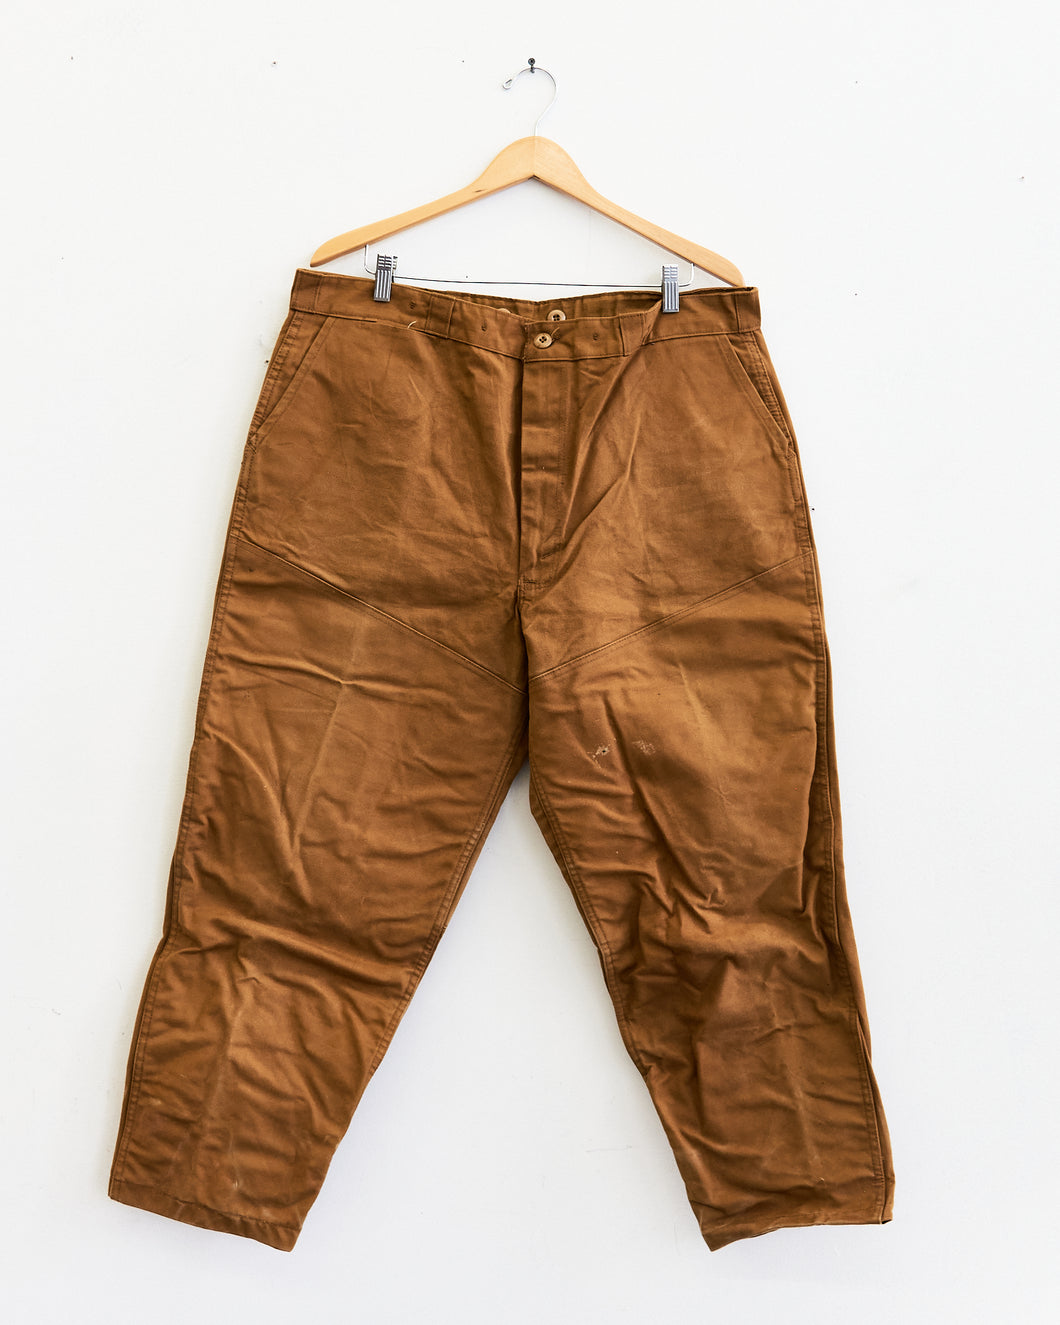 1960s Foremost Penneys Hunting Trousers - 38